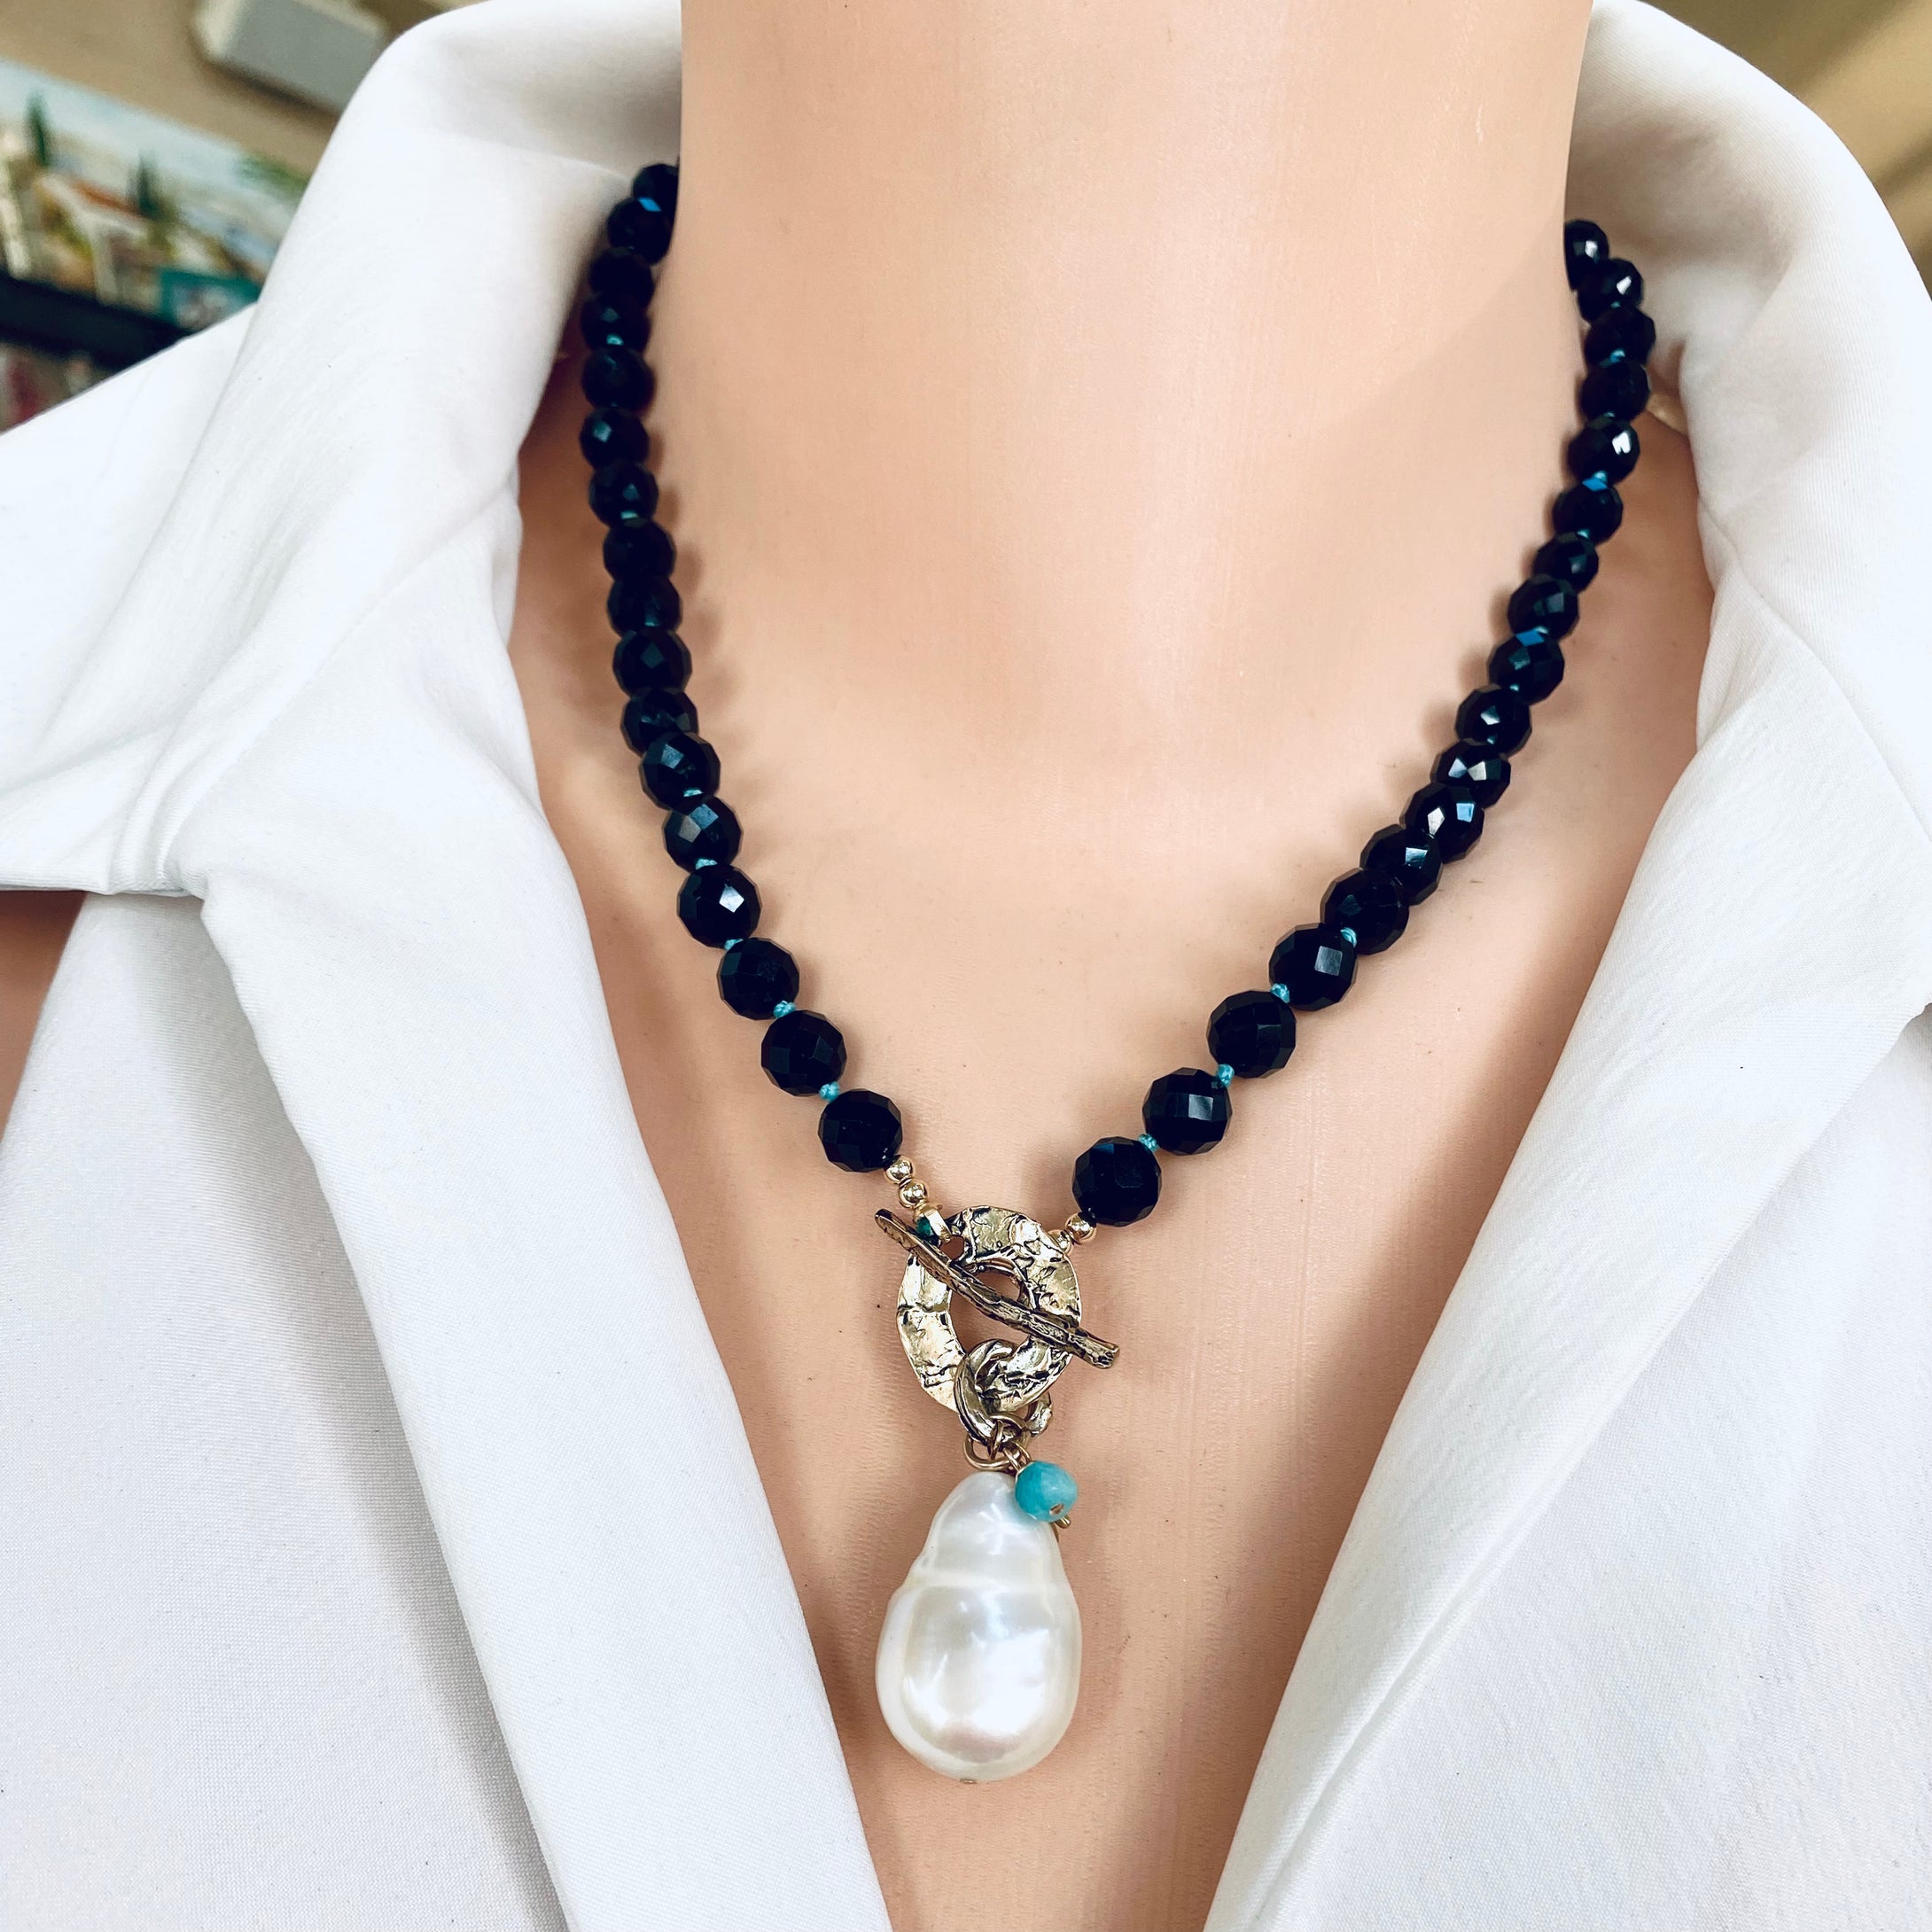 Black Tourmaline Toggle Necklace with Large Baroque Pearl Pendant, Artisan Gold Bronze & Gold Filled Details, 18.5